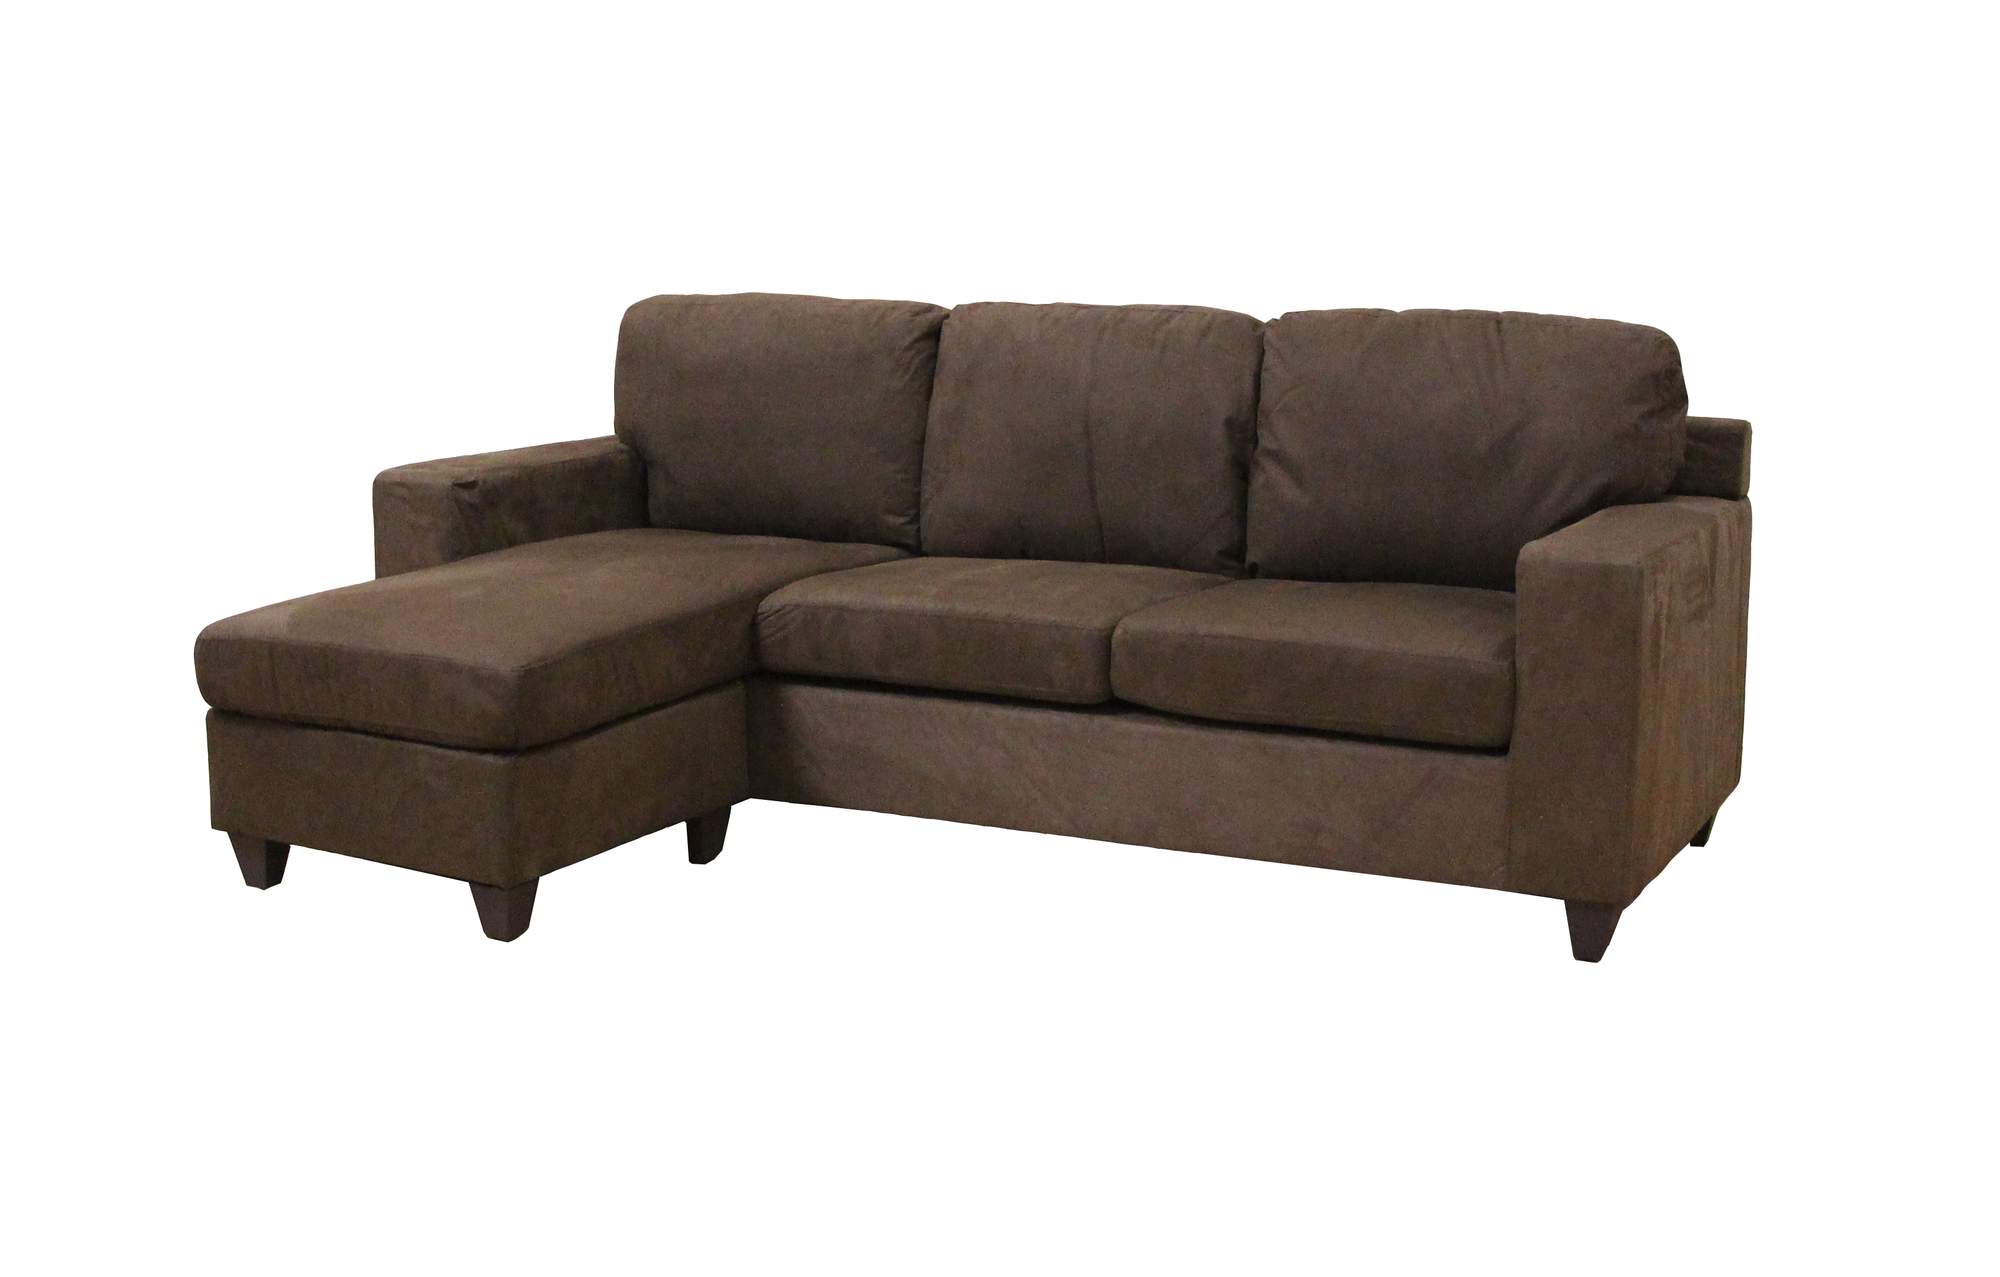 Acme Vogue Microfiber Reversible Chaise Sectional Sofa, Multiple Colors - image 1 of 4